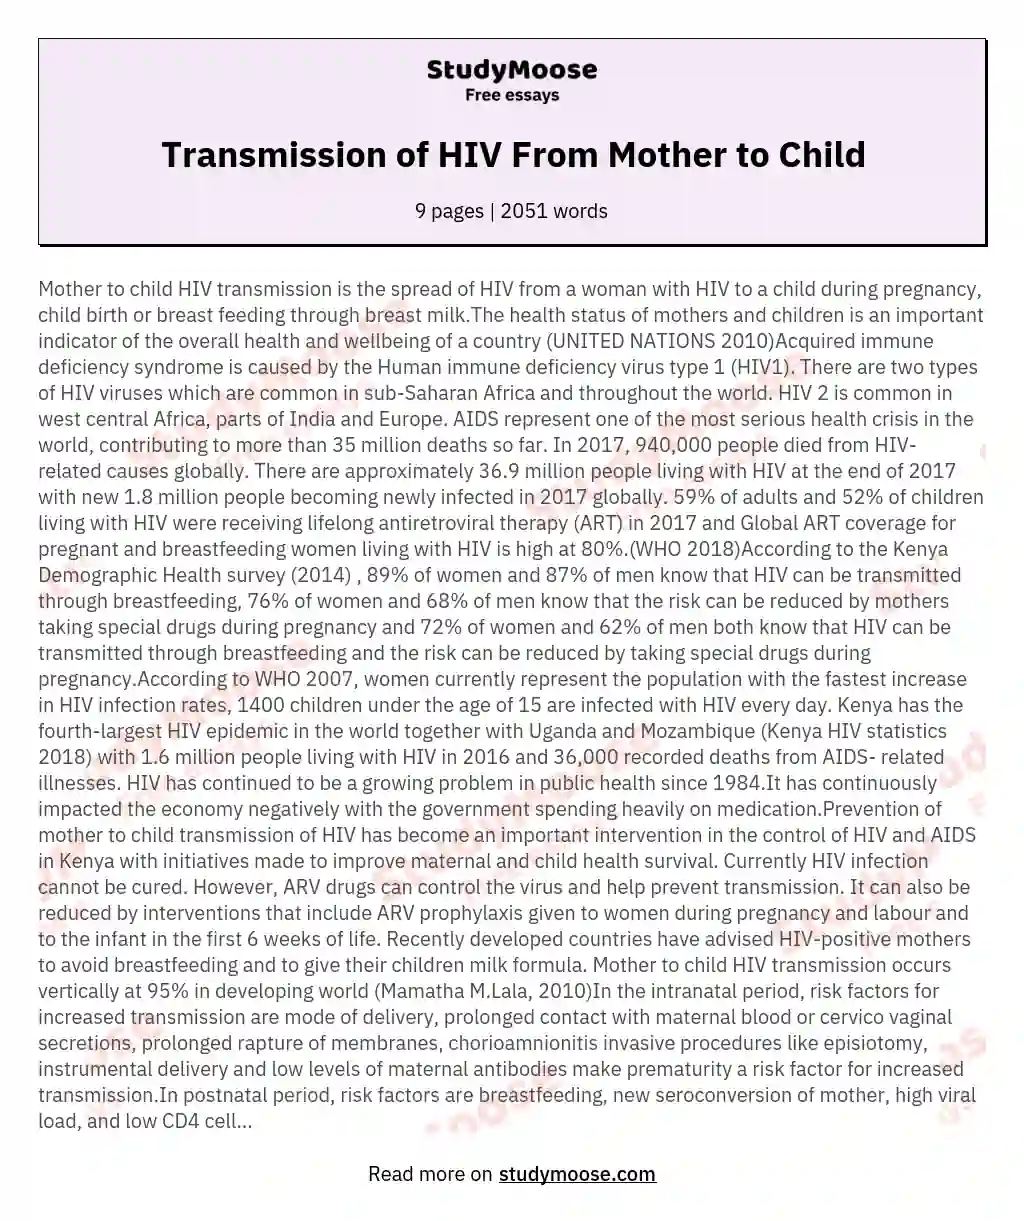 Transmission of HIV From Mother to Child essay